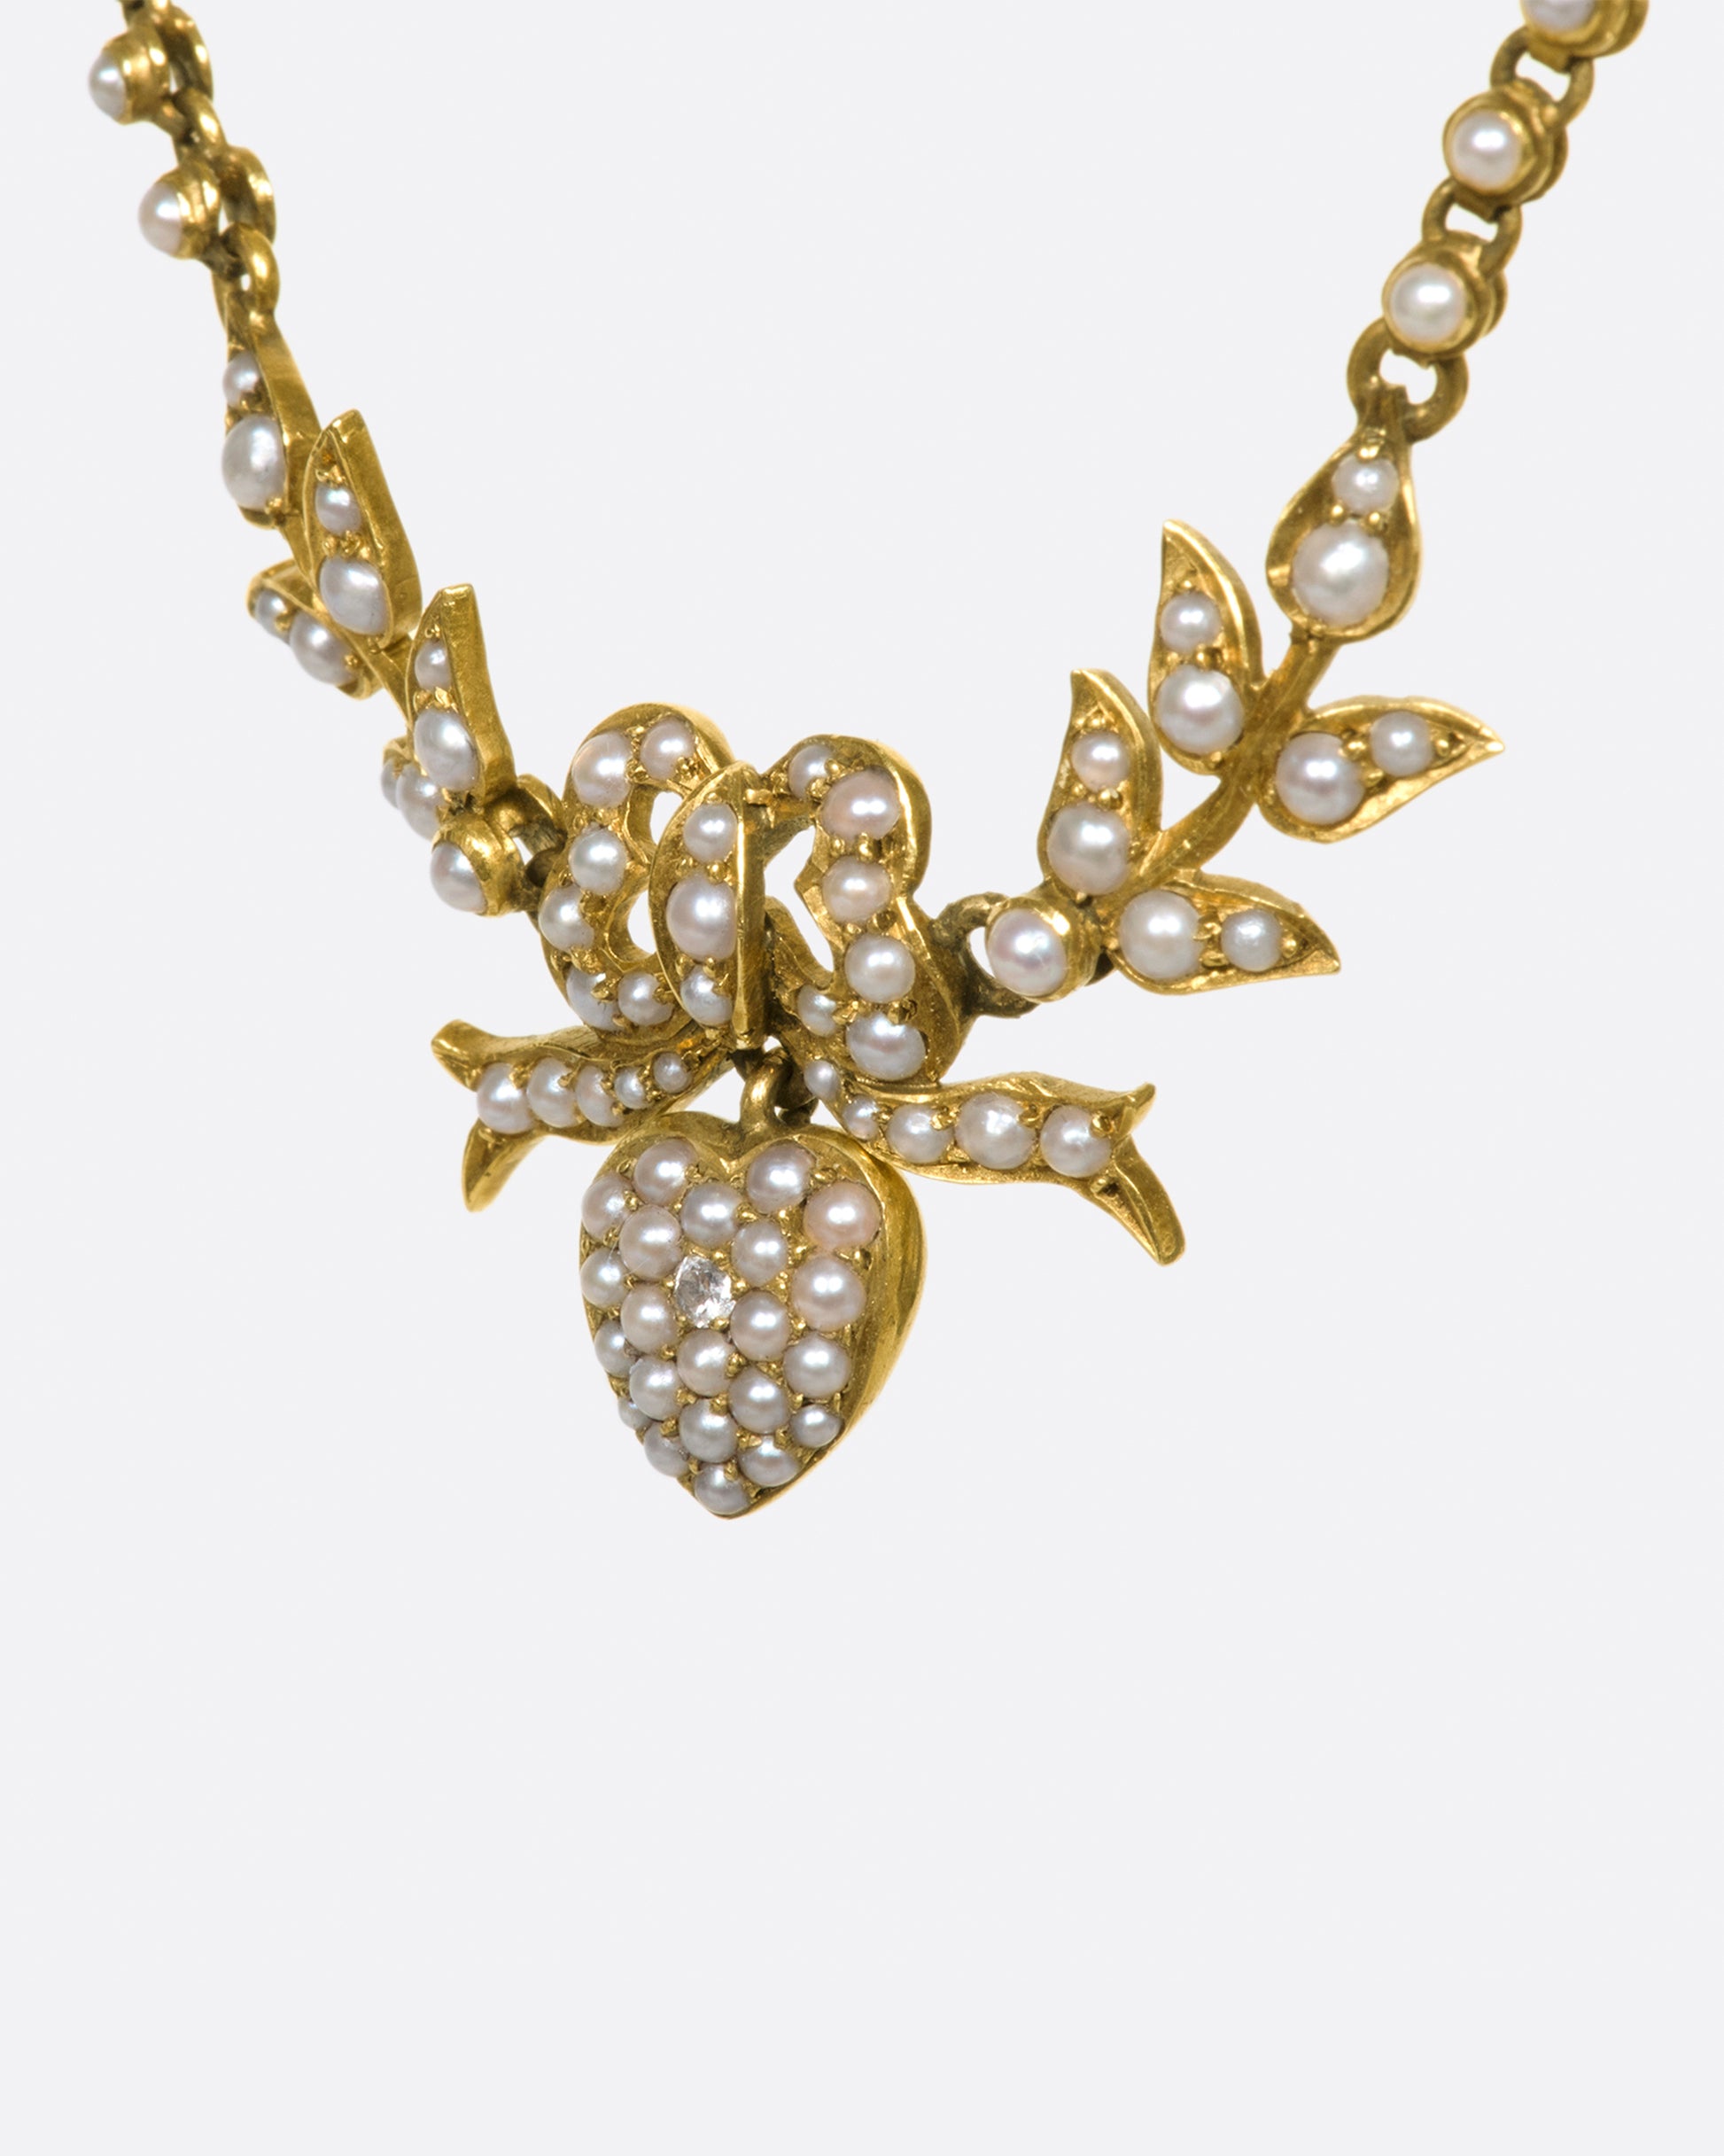 An English, 15k gold, belle epoque, turn of the century festoon necklace with natural seed pearls.